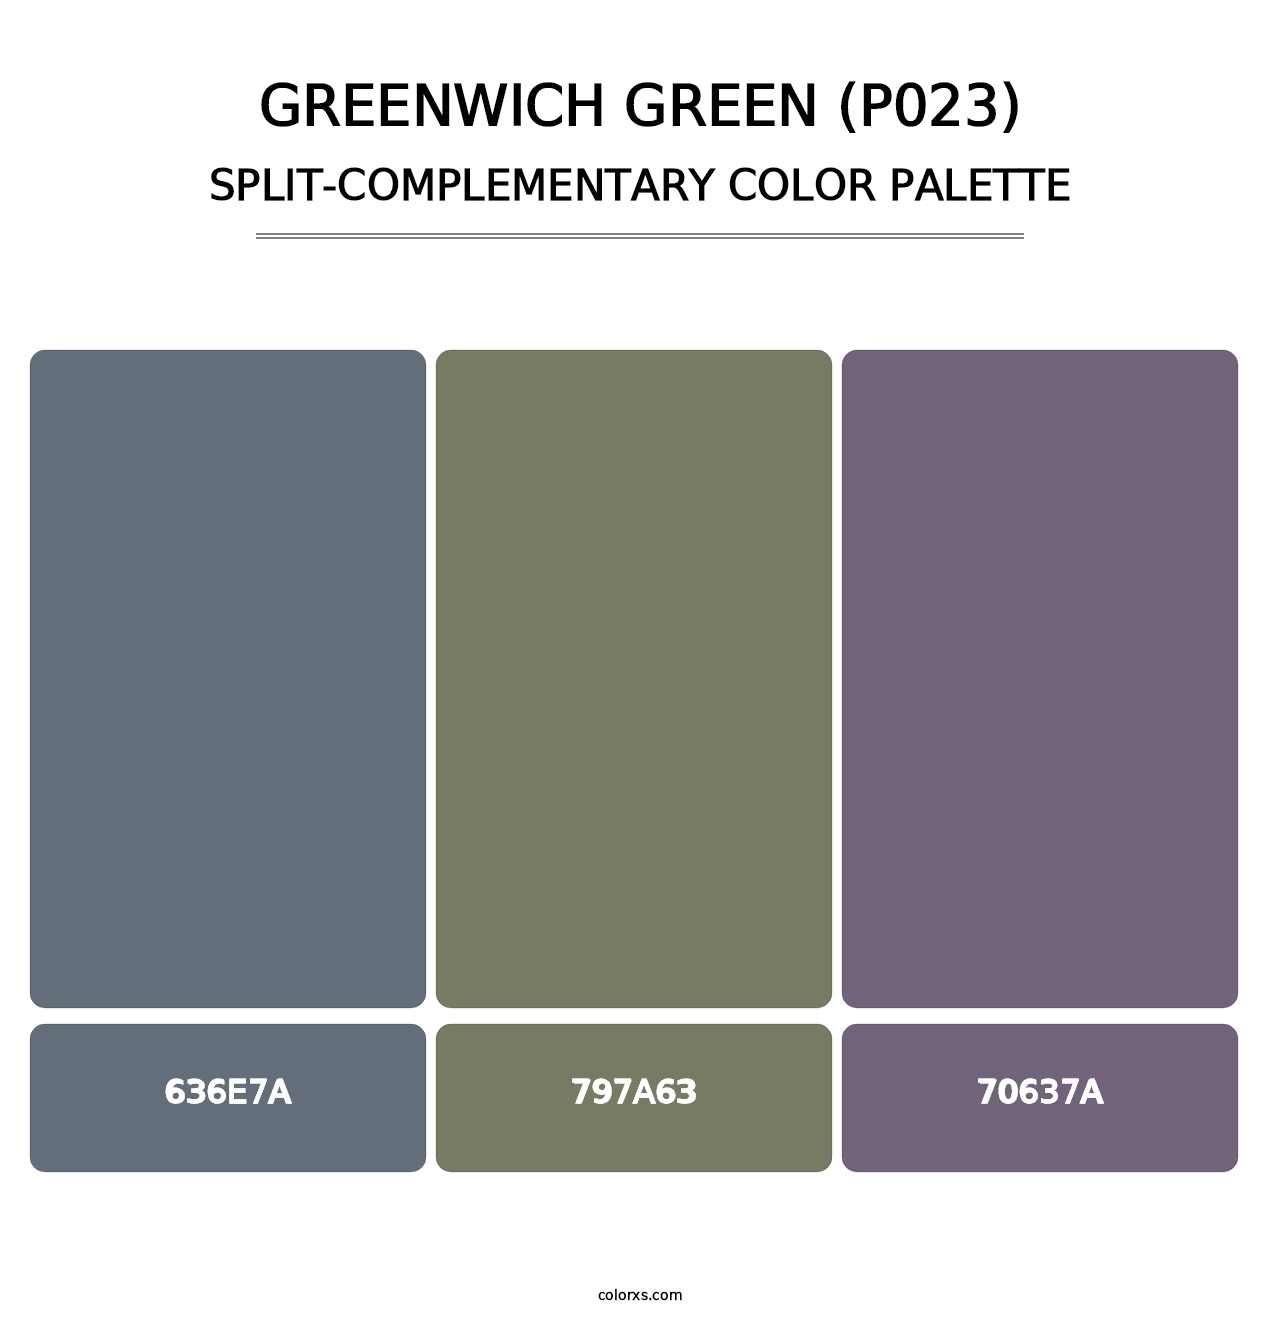 Greenwich Green (P023) - Split-Complementary Color Palette